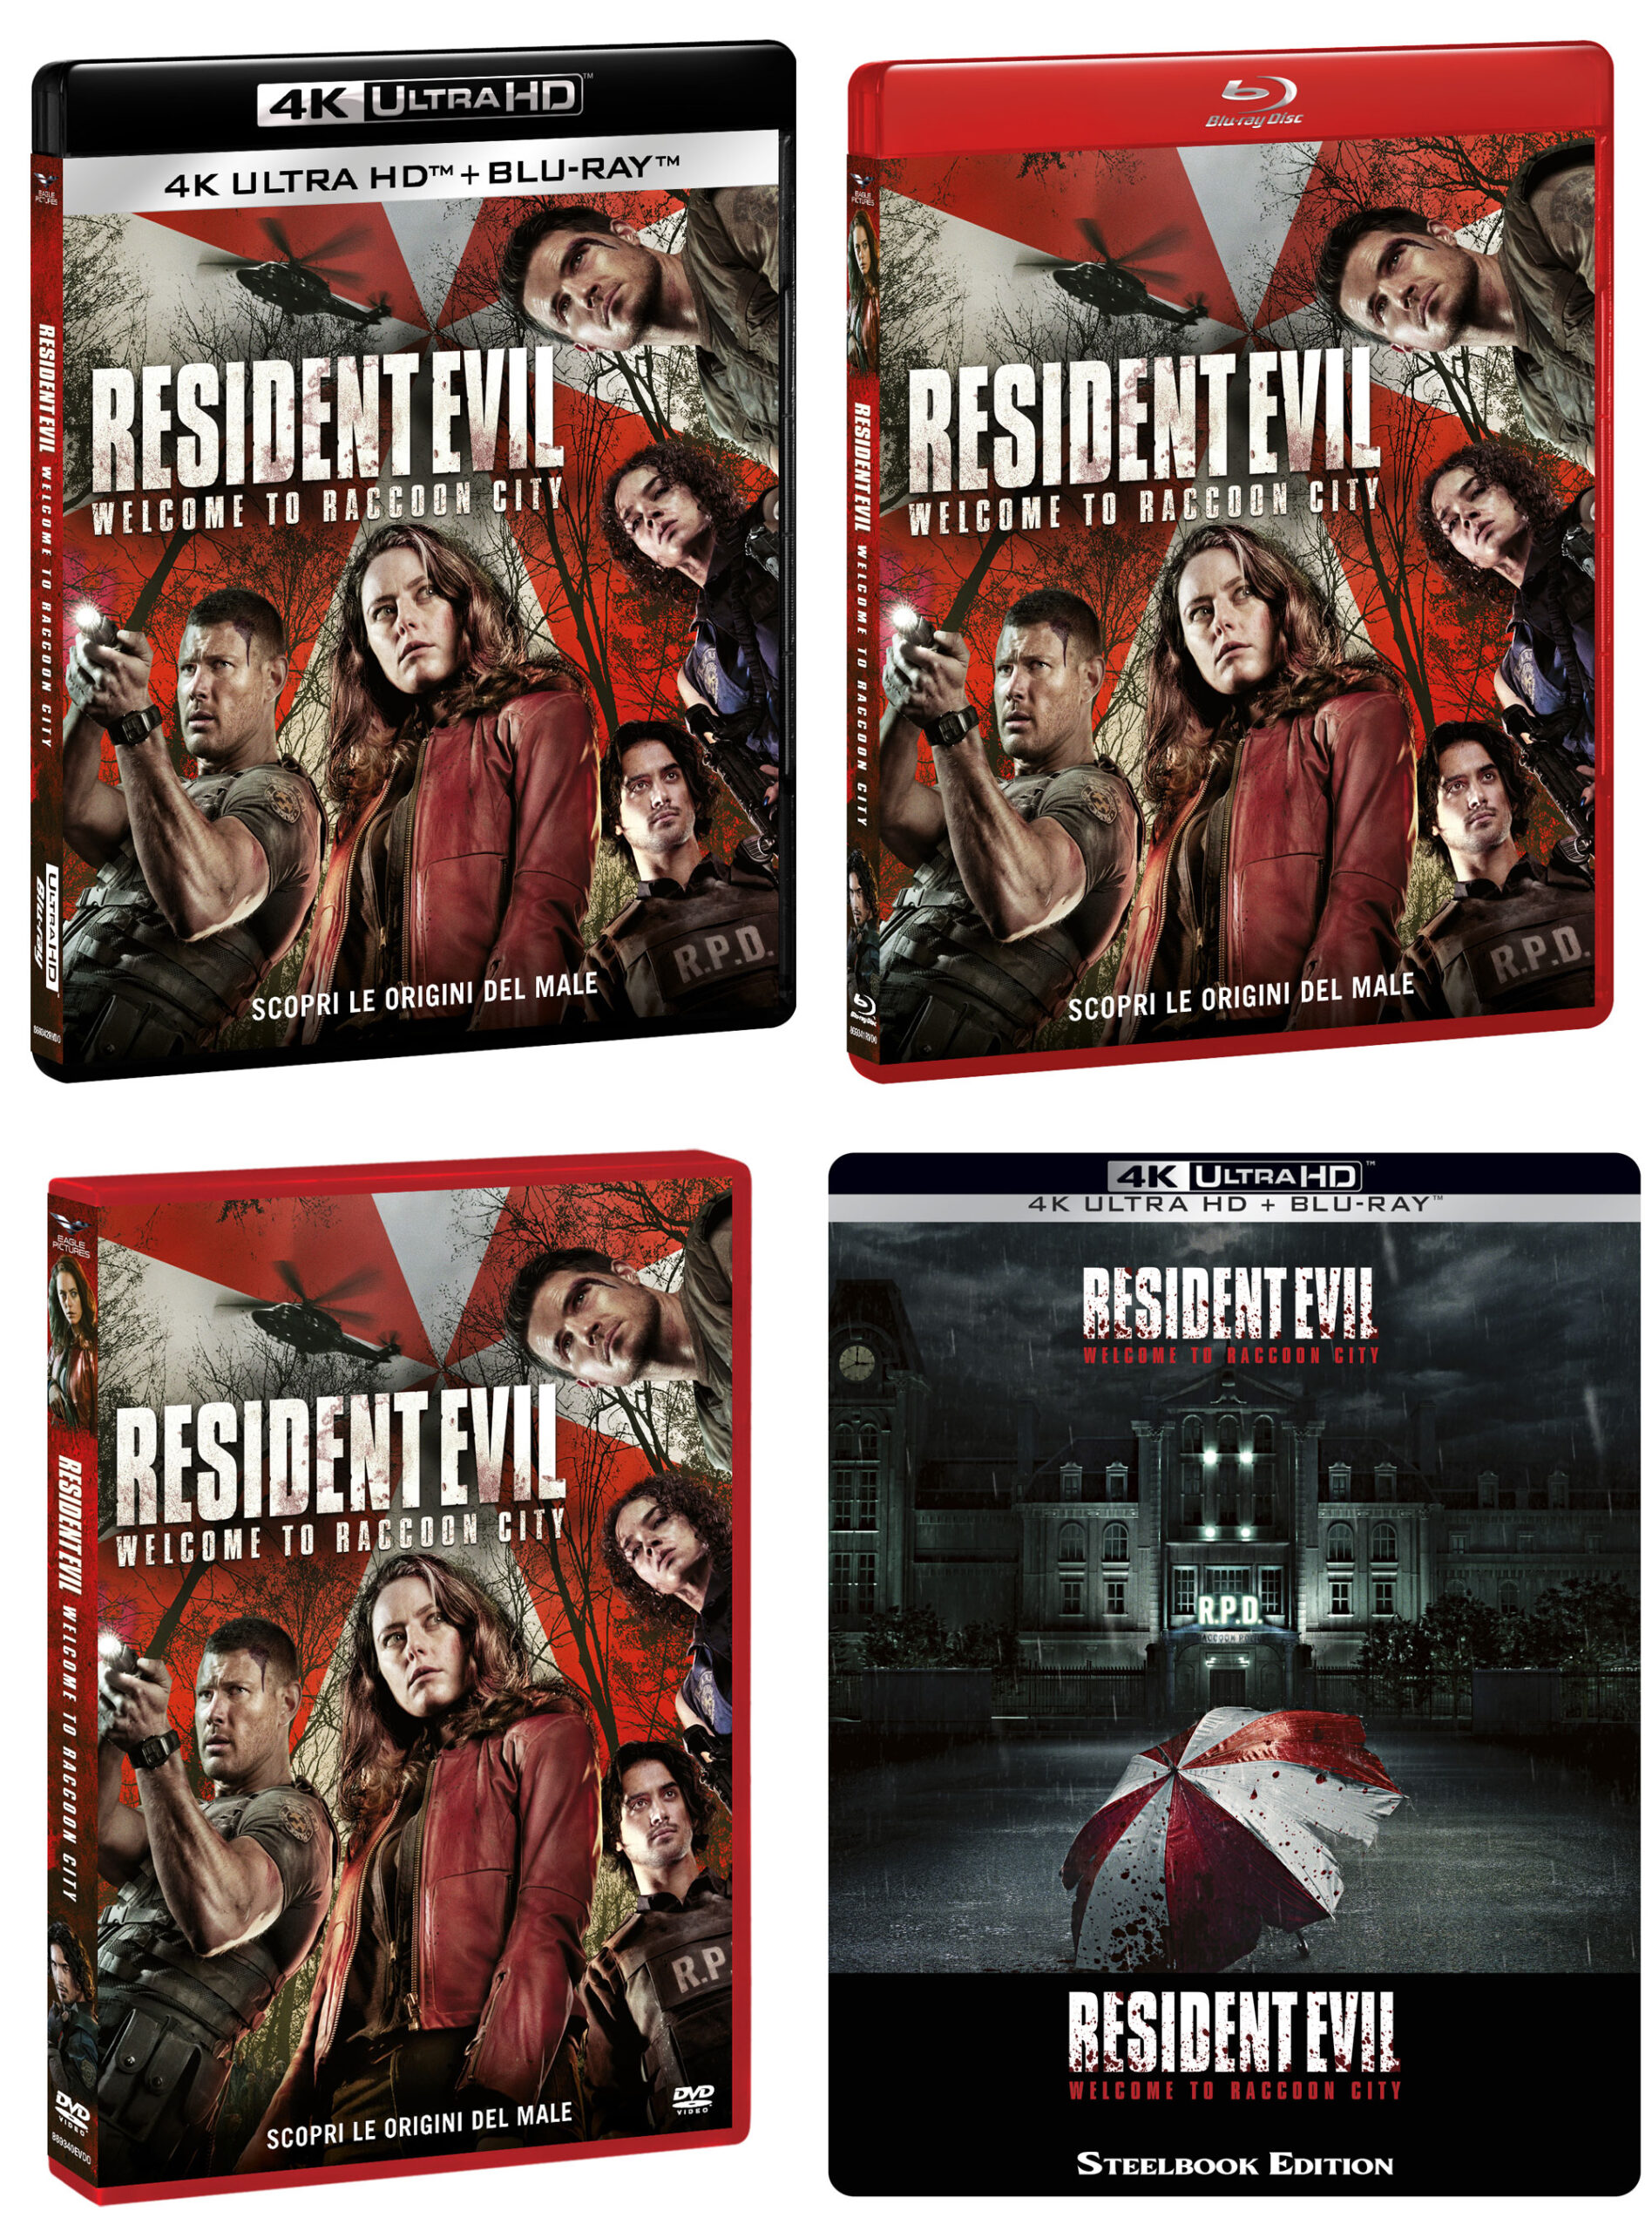 Resident Evil: Welcome To Raccoon City di Johannes Roberts in DVD, Blu-ray, 4K